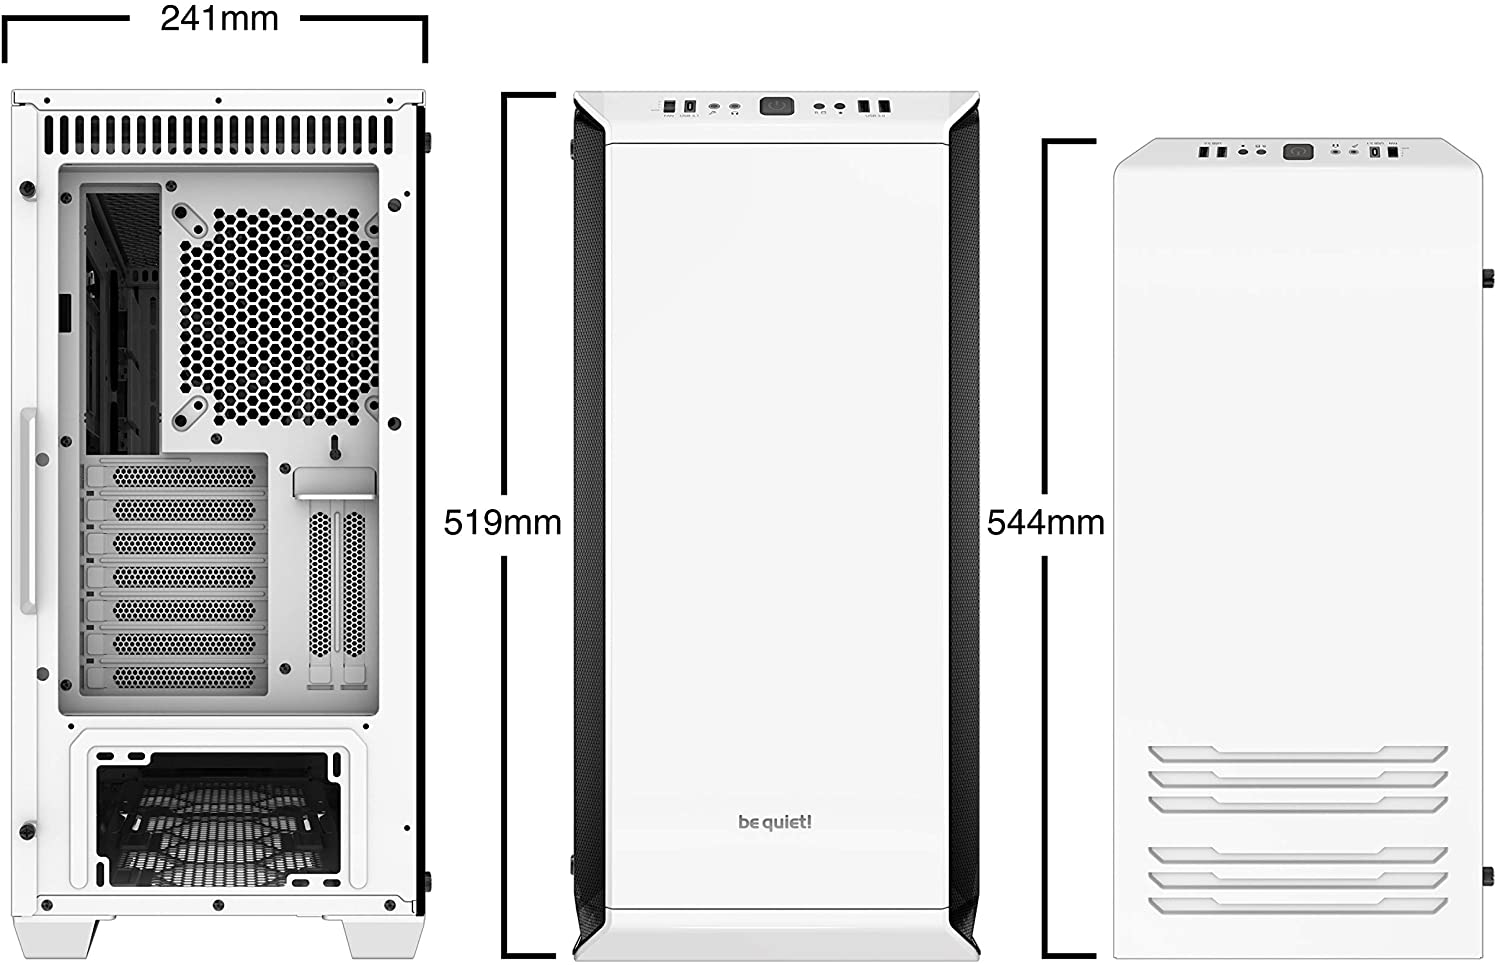 Be Quiet! Dark Base 700 White Edition, BGW33, Limited, Midi Tower ATX, 2 Pre-Installed Fans, RGB Leds, Tempered Glass Window